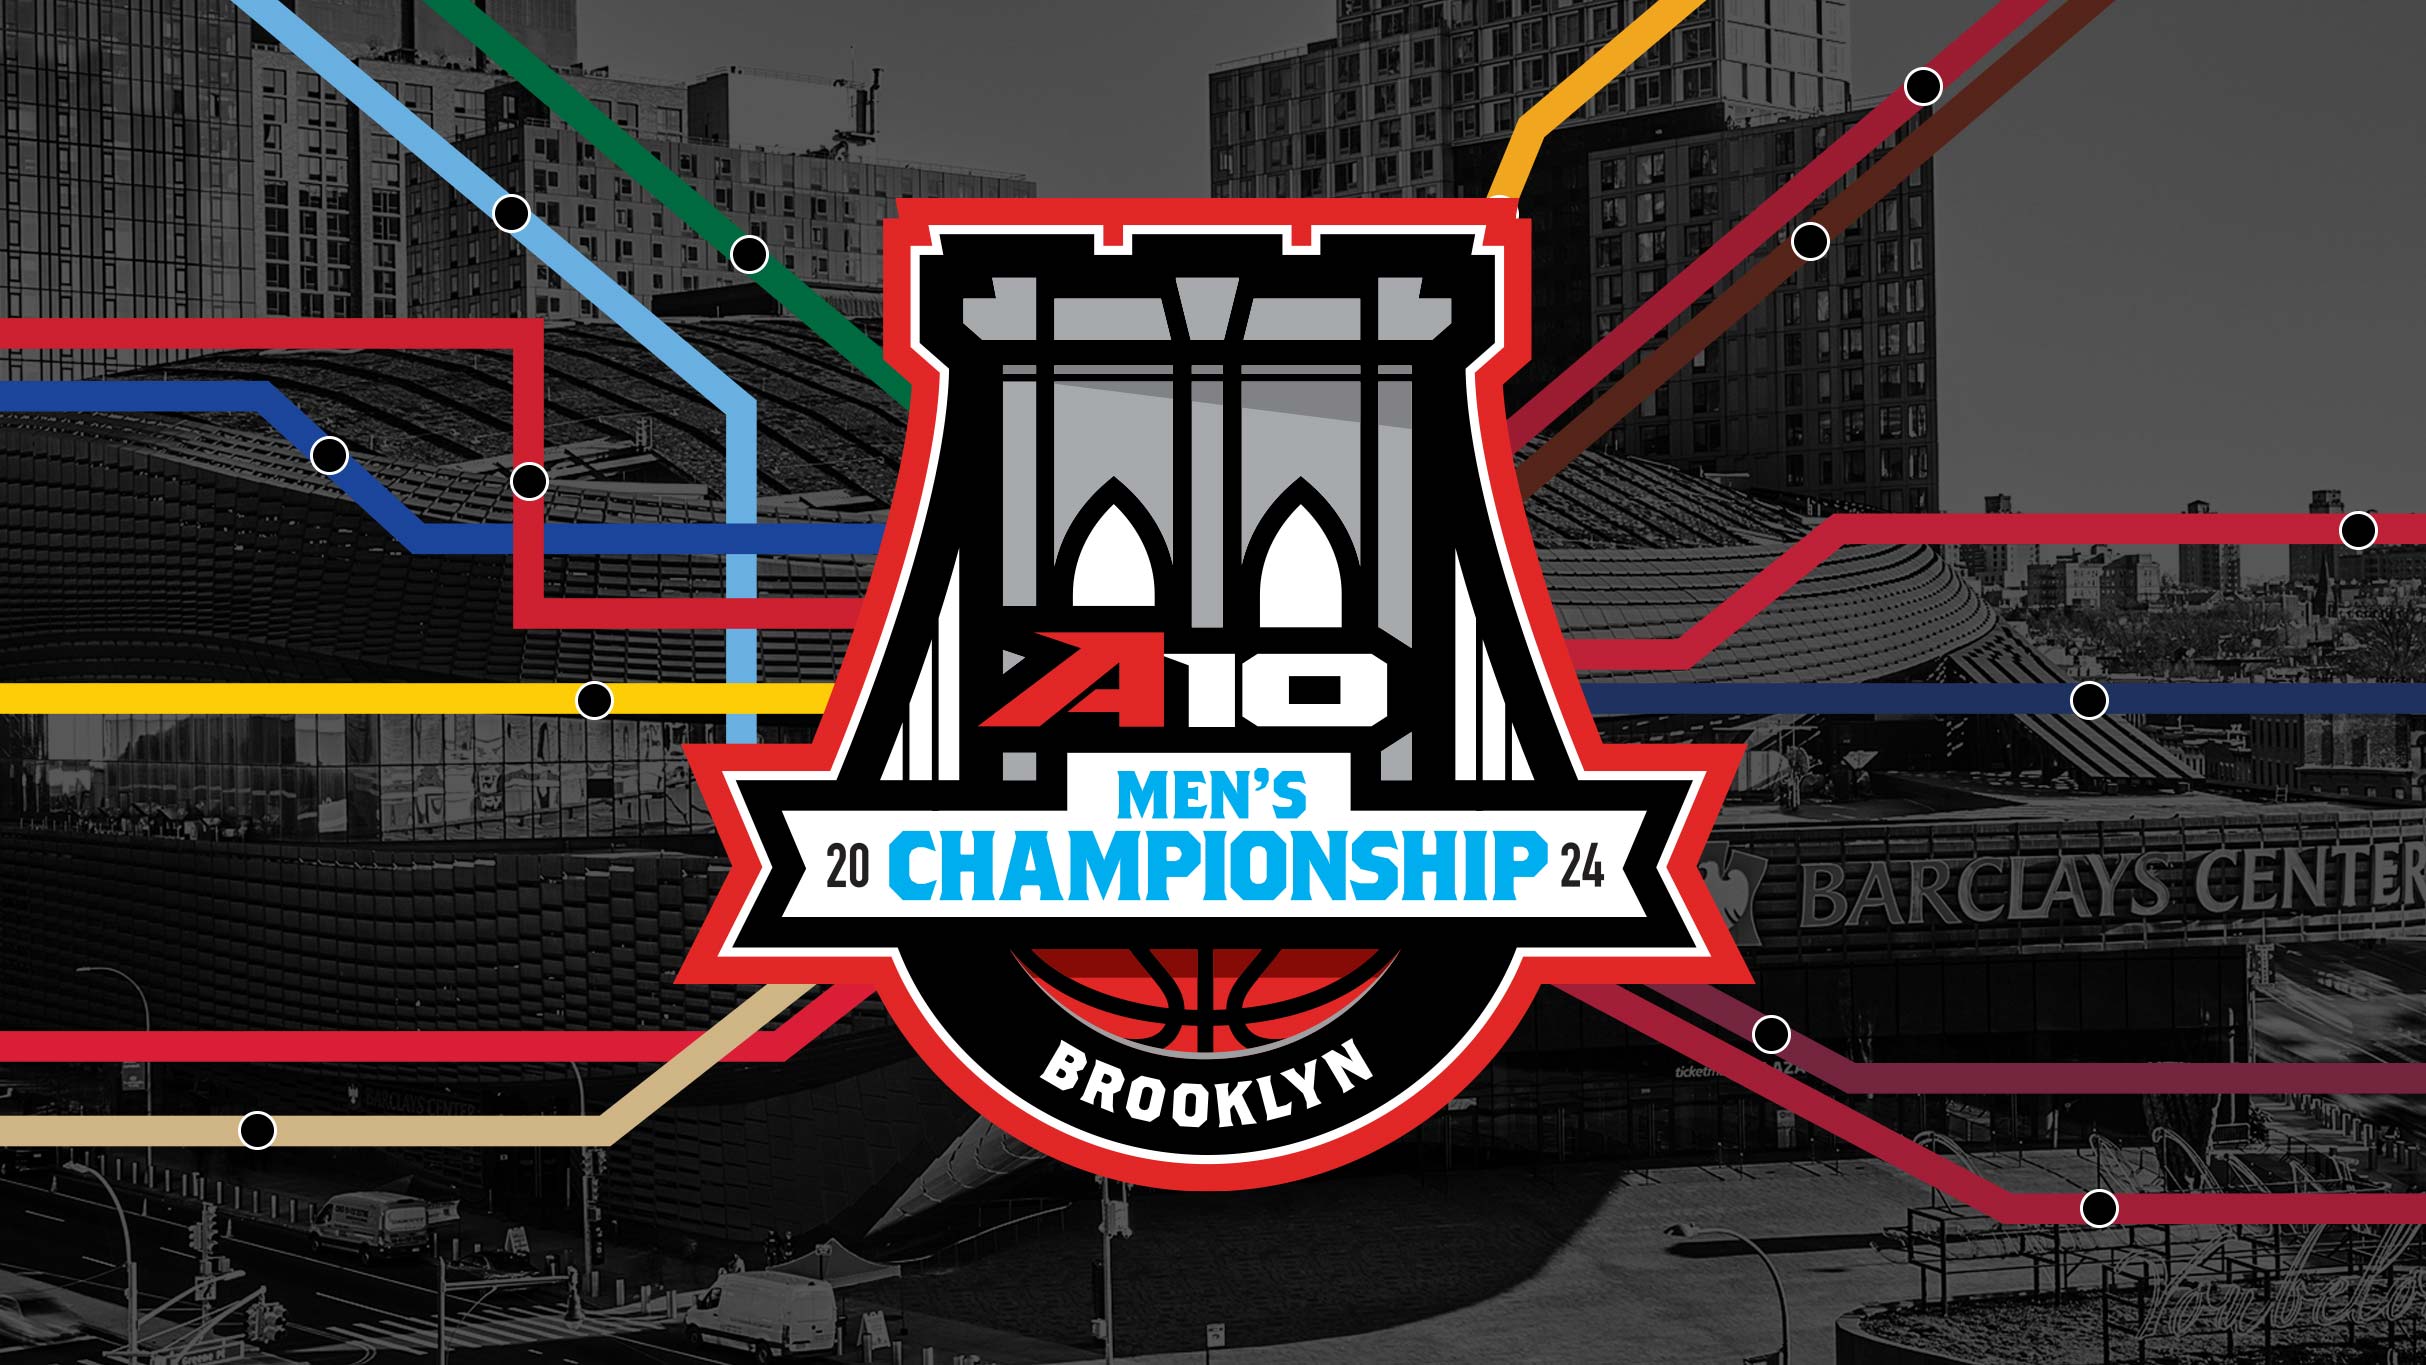 Atlantic 10 Men's Basketball Championship - Session 4 in Brooklyn promo photo for American Express® Early Access presale offer code